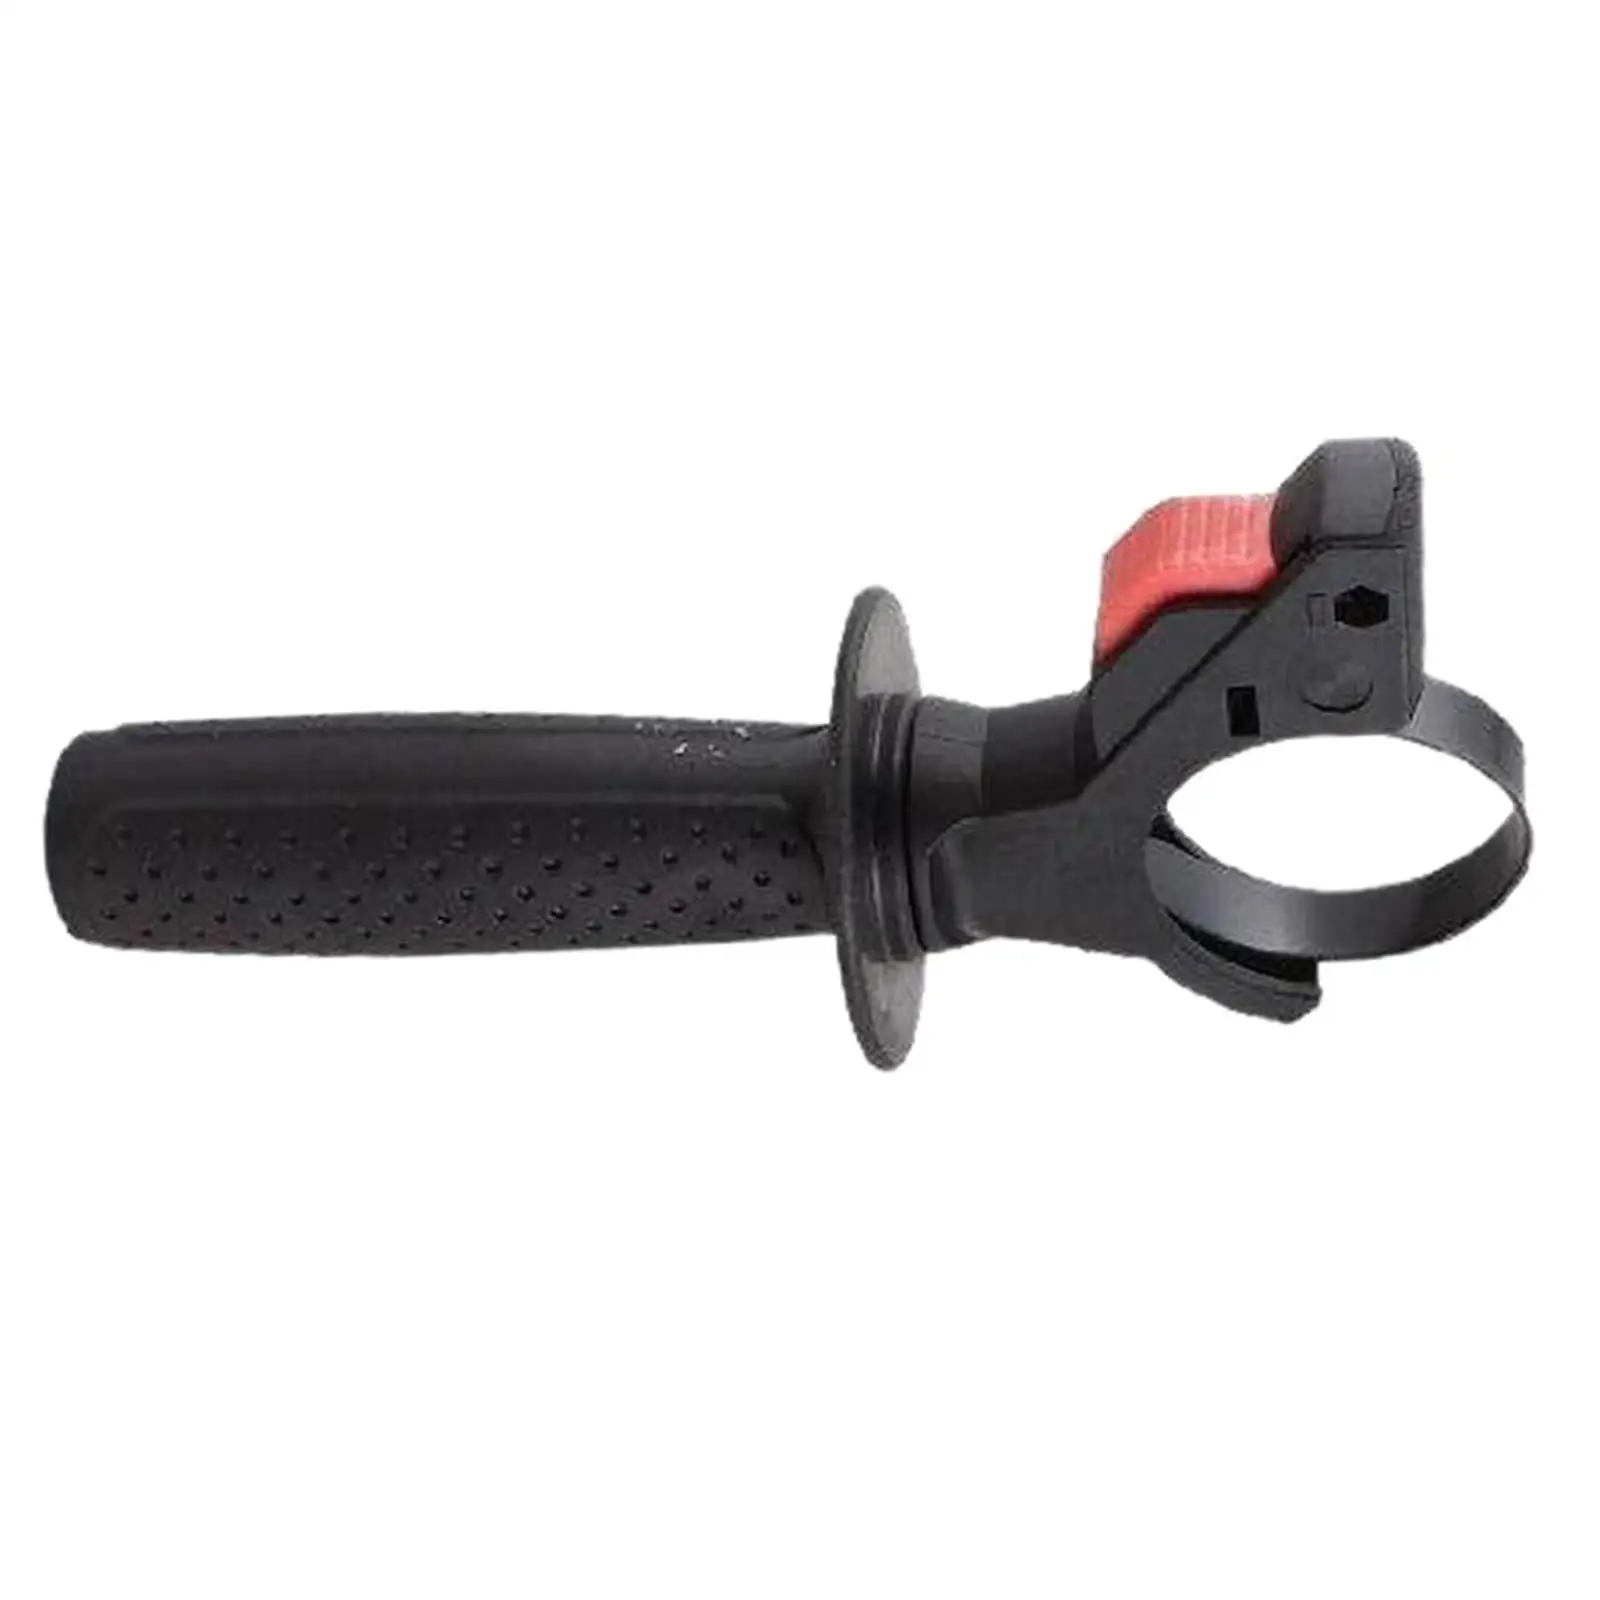 Adjustable Front Handle Professional Detachable 45mm-48mm Comfortable for 26 Electric Hammer Power Tool Parts Fitments Replaces